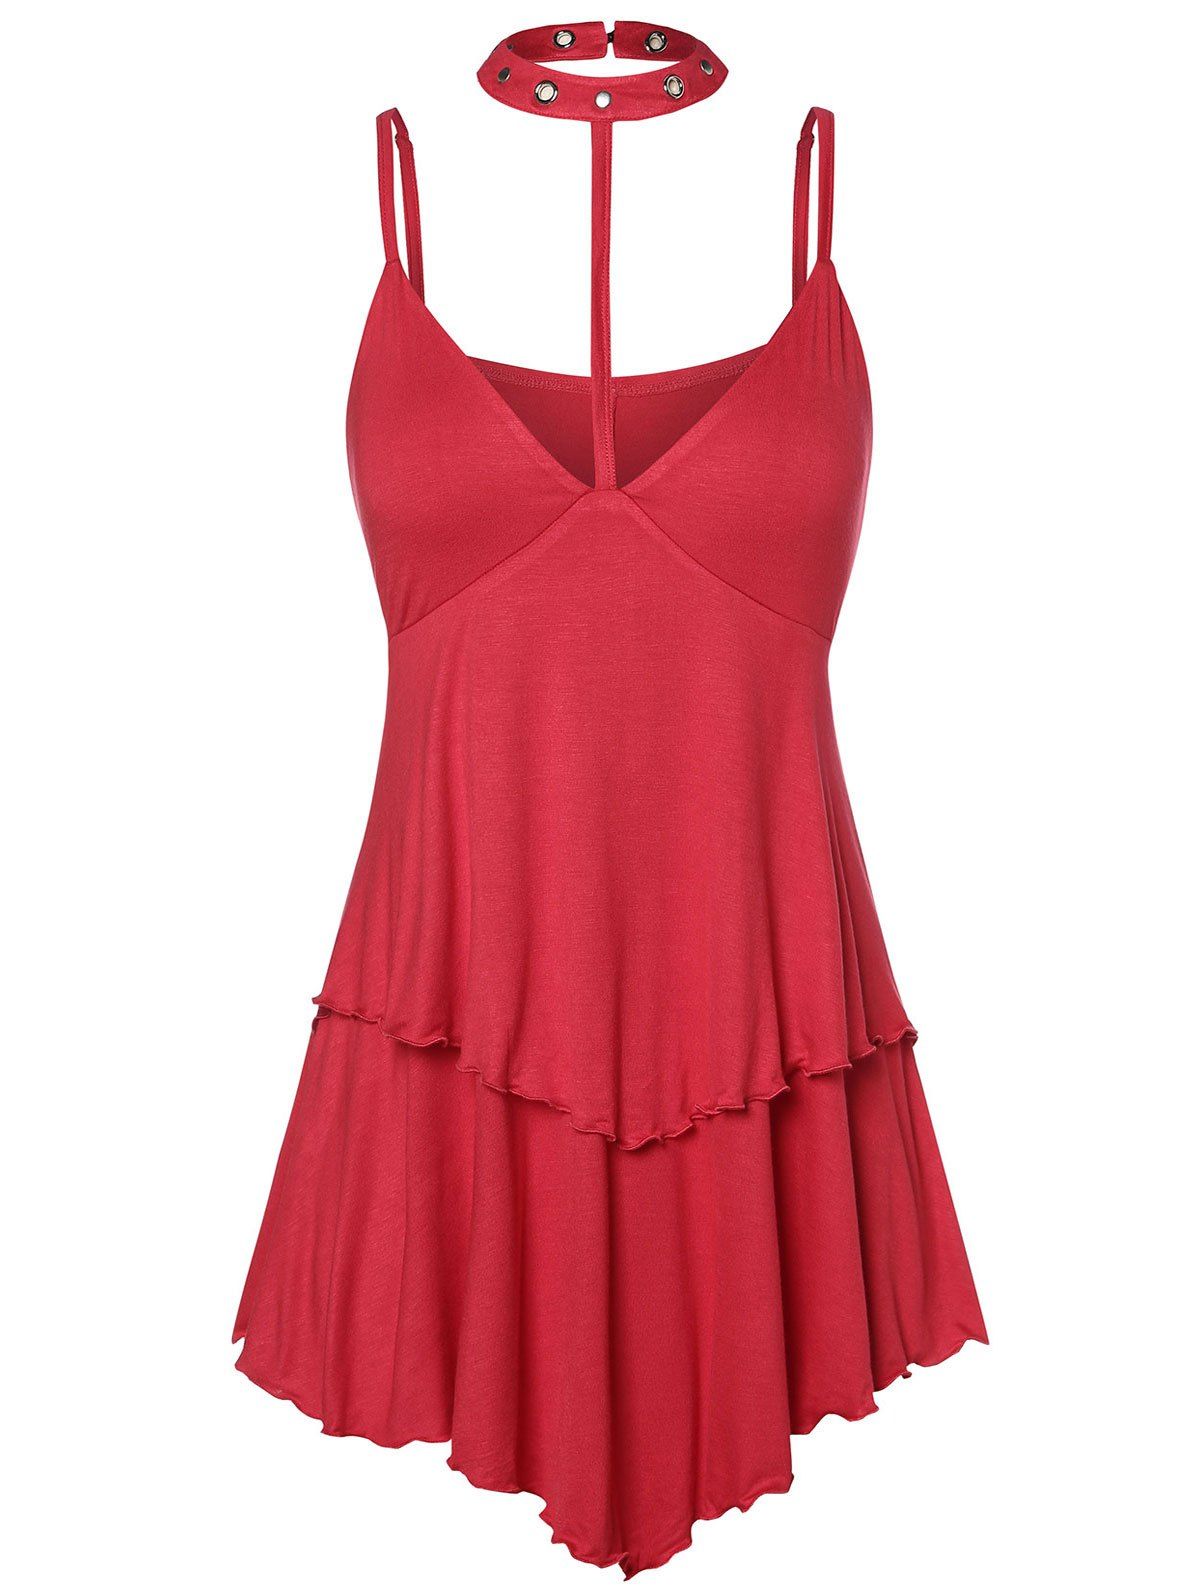 [17% OFF] 2021 Plus Size Spaghetti Strap Tiered Tank Top In RED | DressLily